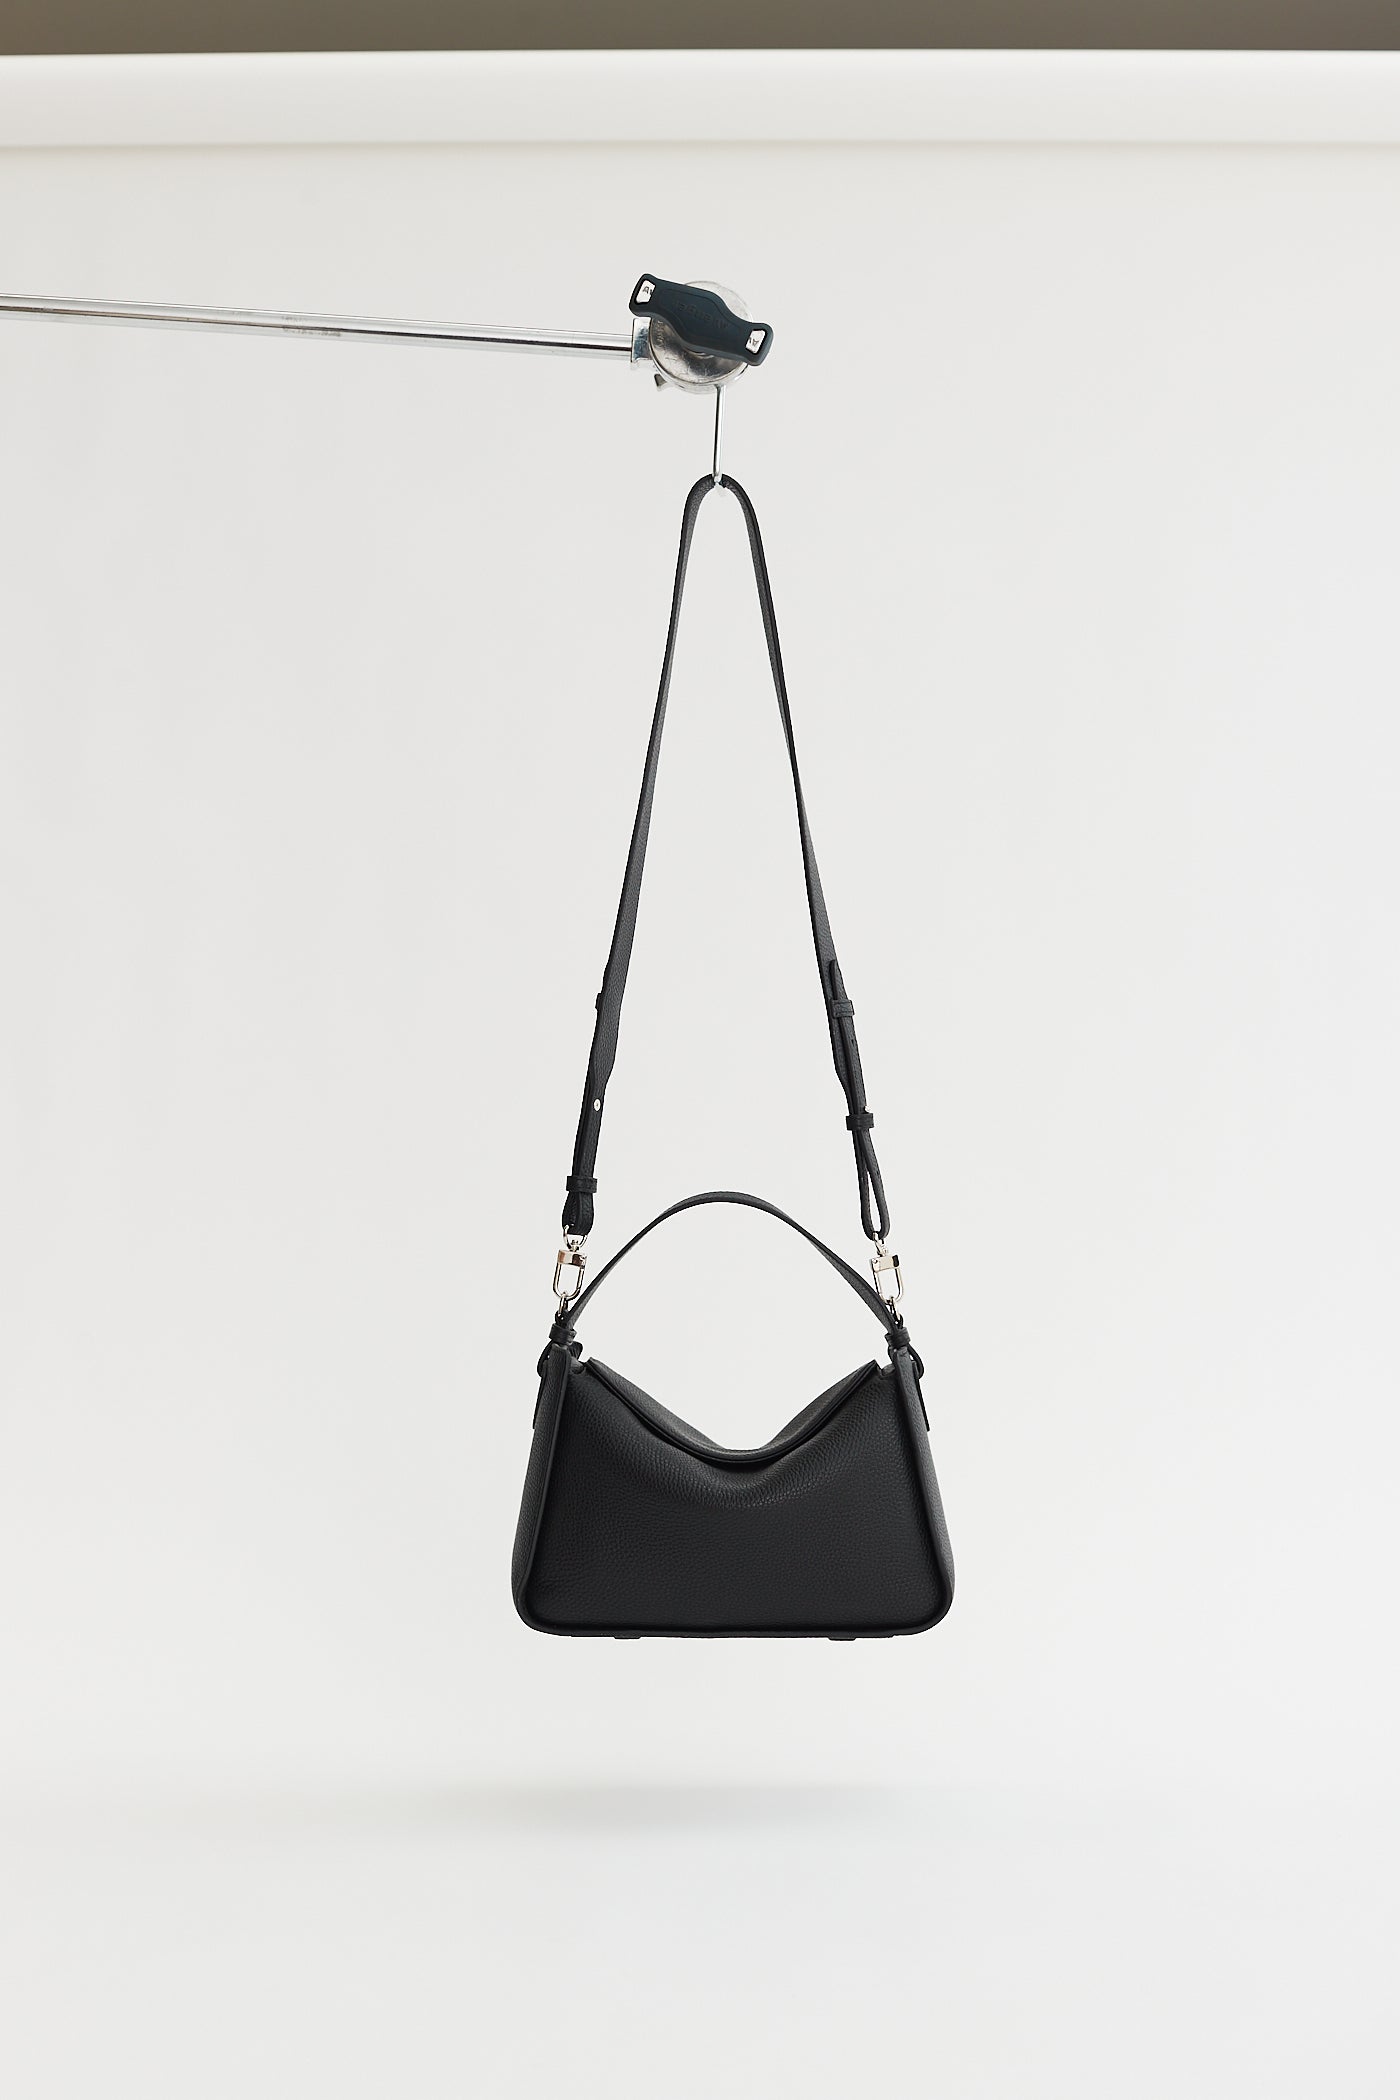 Clementine Bag in Black | The Horse